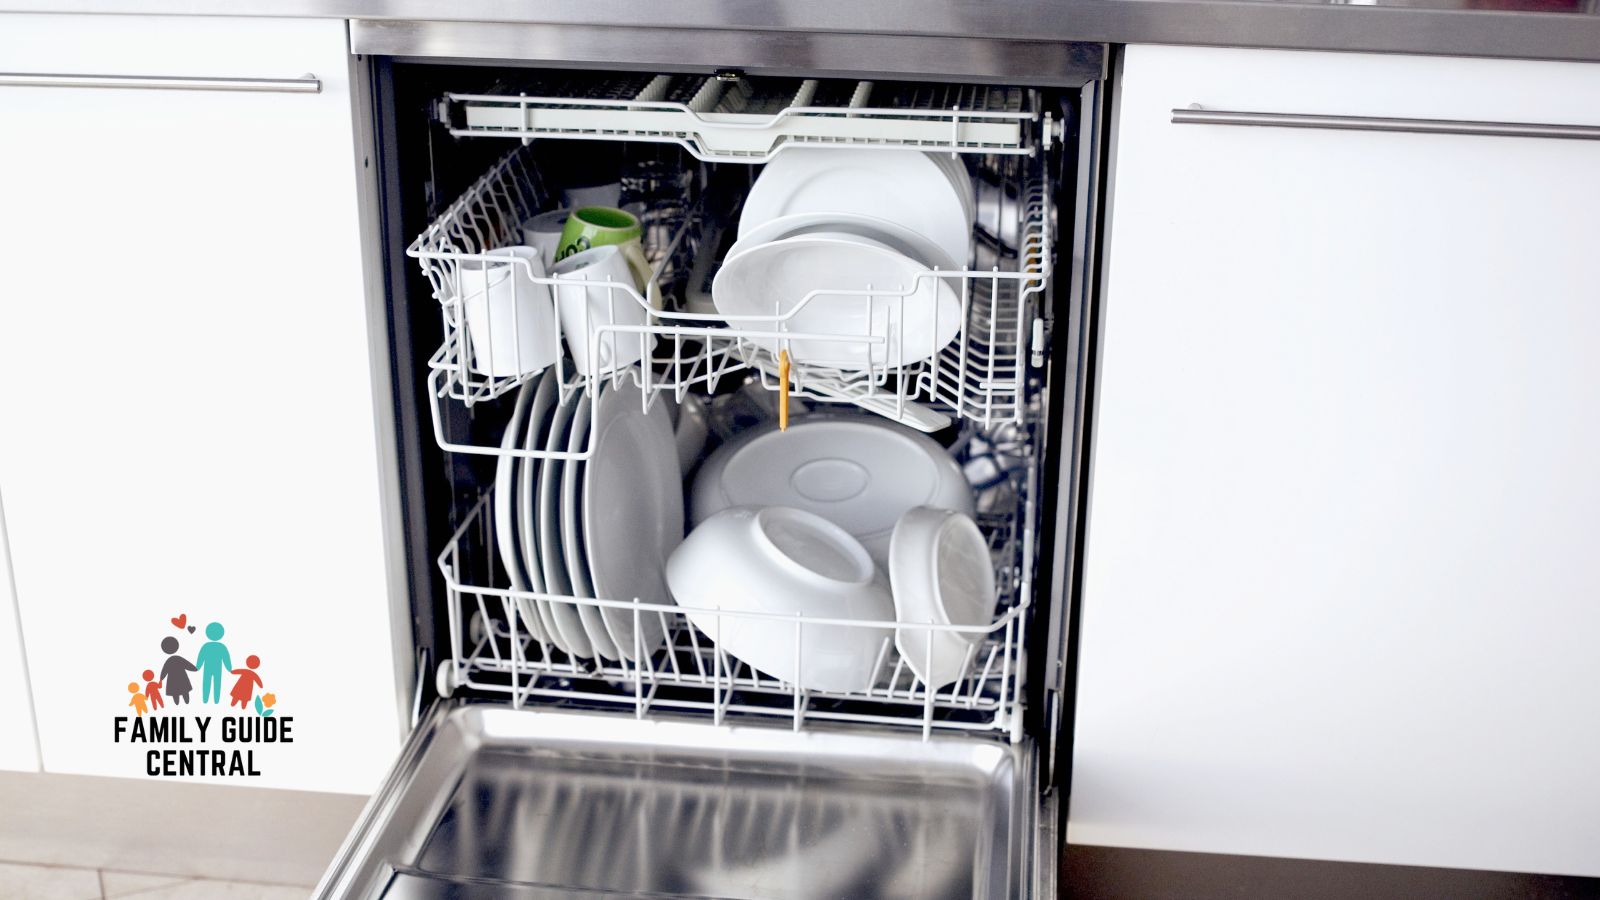 Stainless steel going into dishwasher - familyguidecentral.com